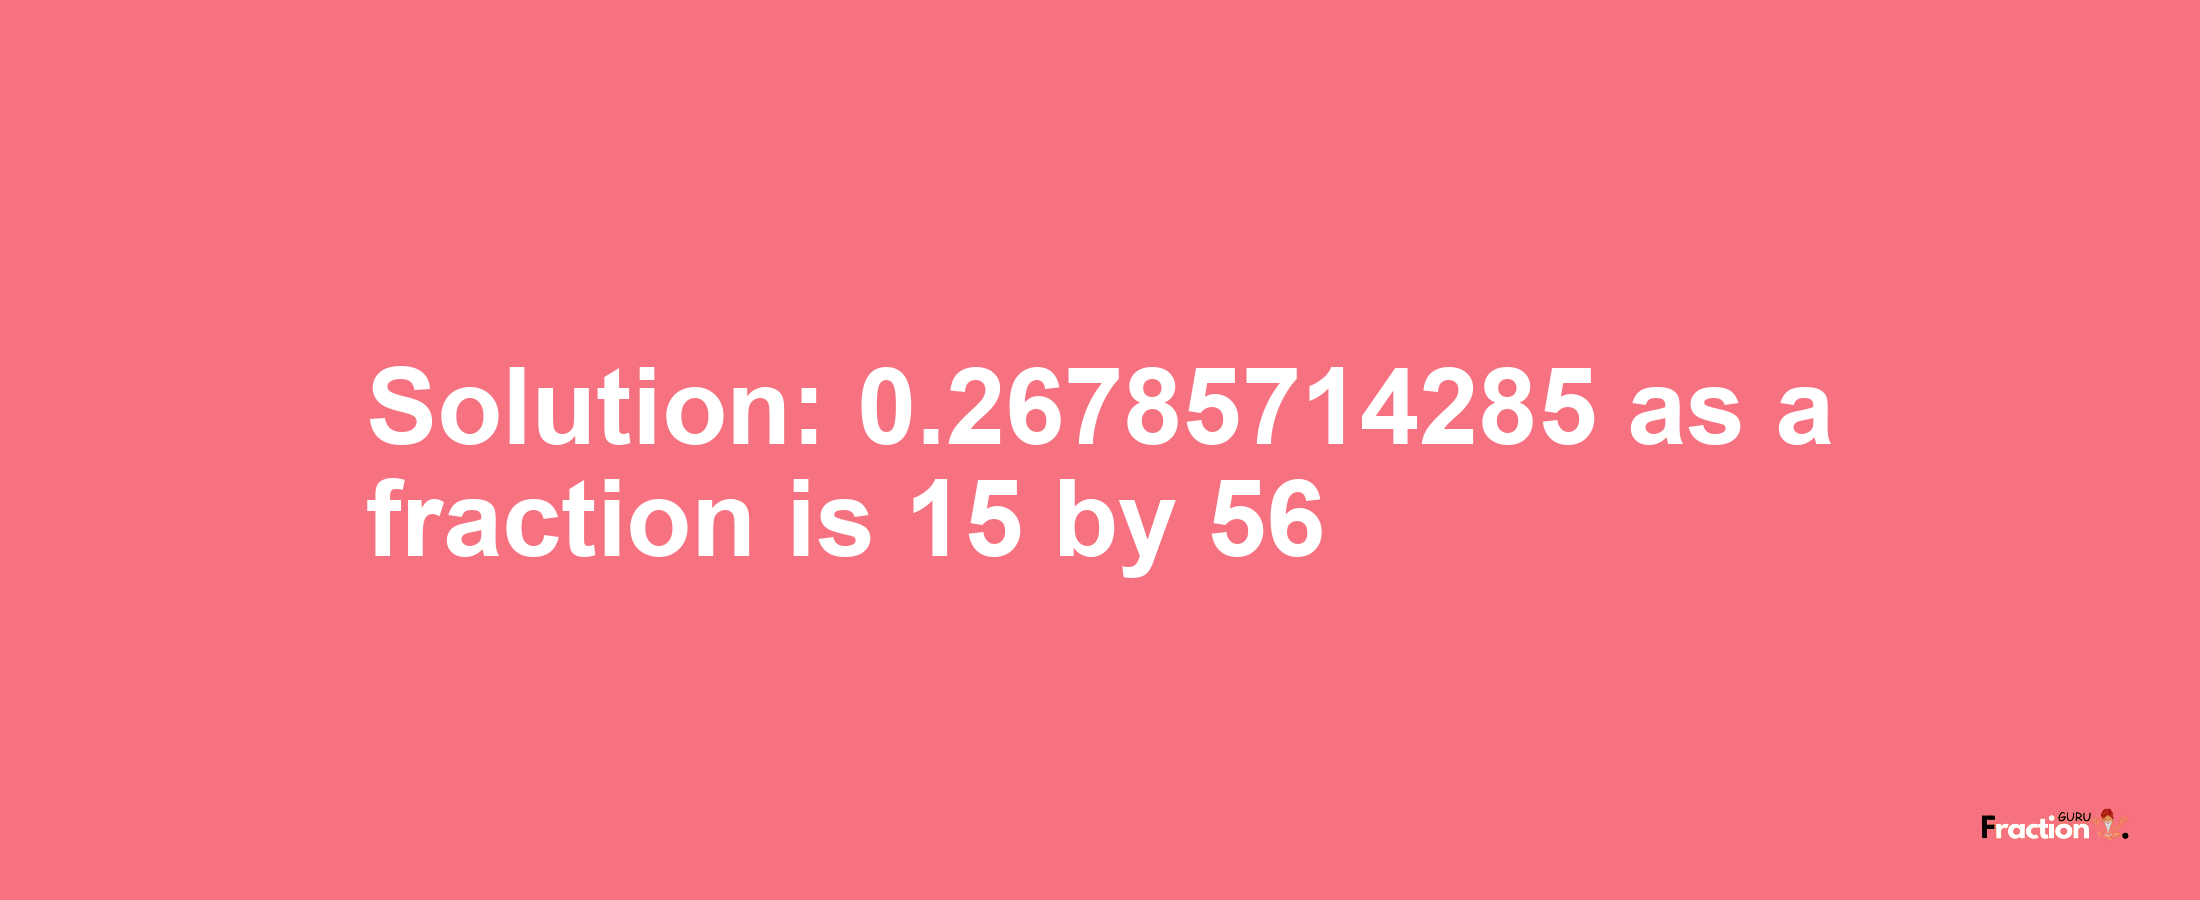 Solution:0.26785714285 as a fraction is 15/56